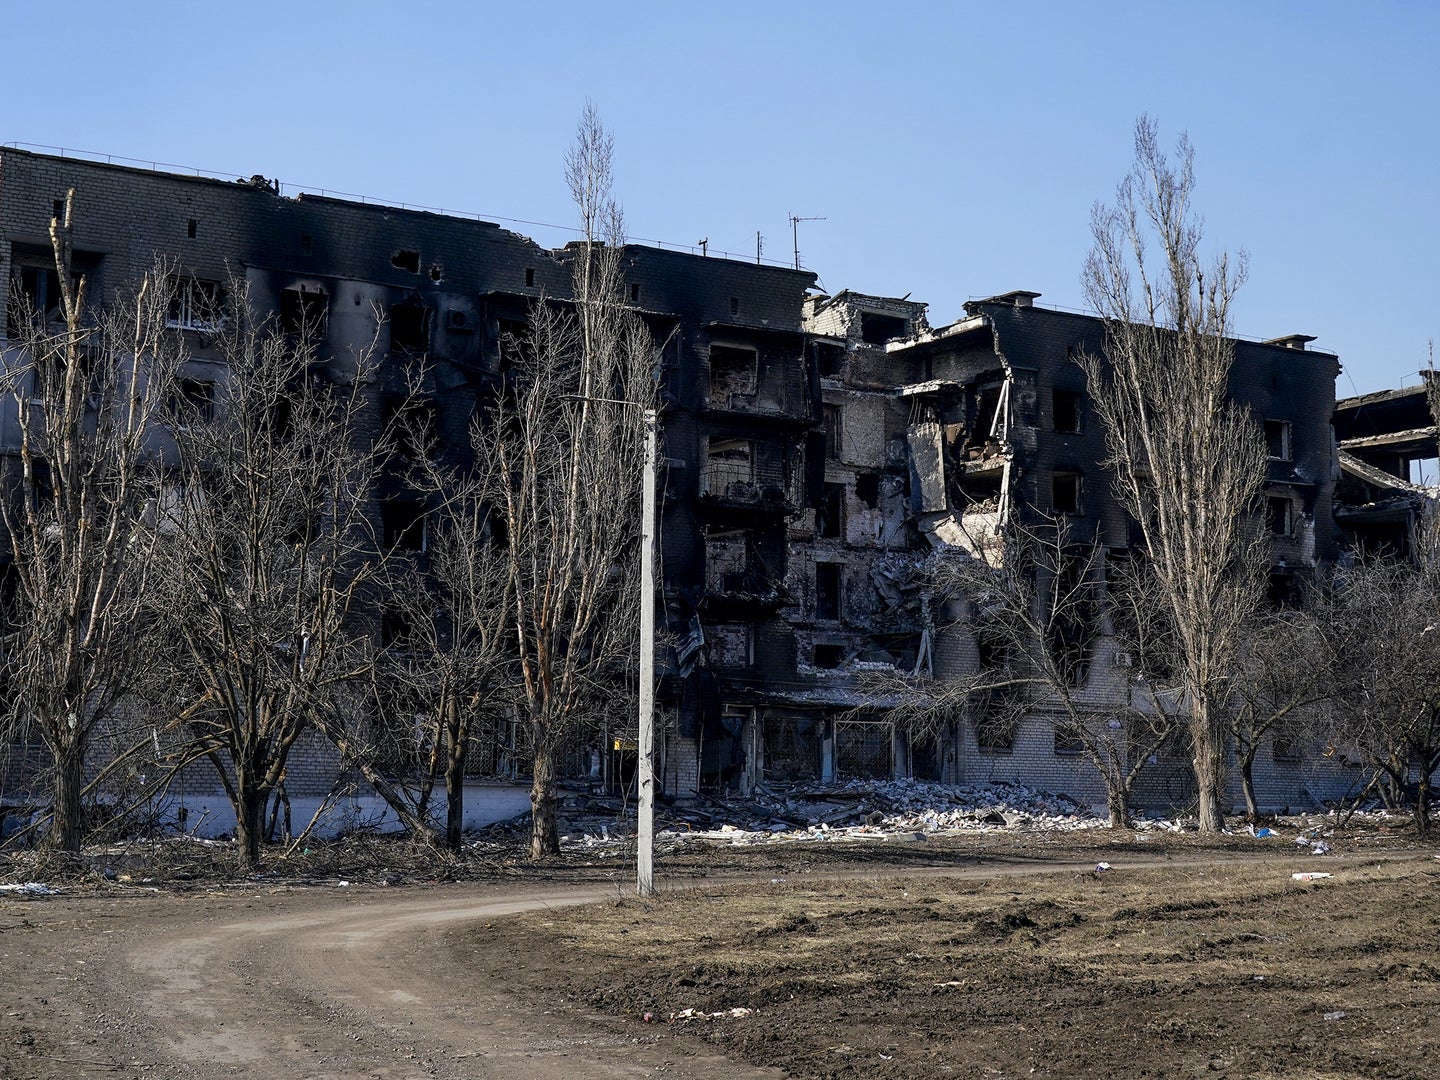 Destroyed buildings in the Ukrainian city of Mariupol.